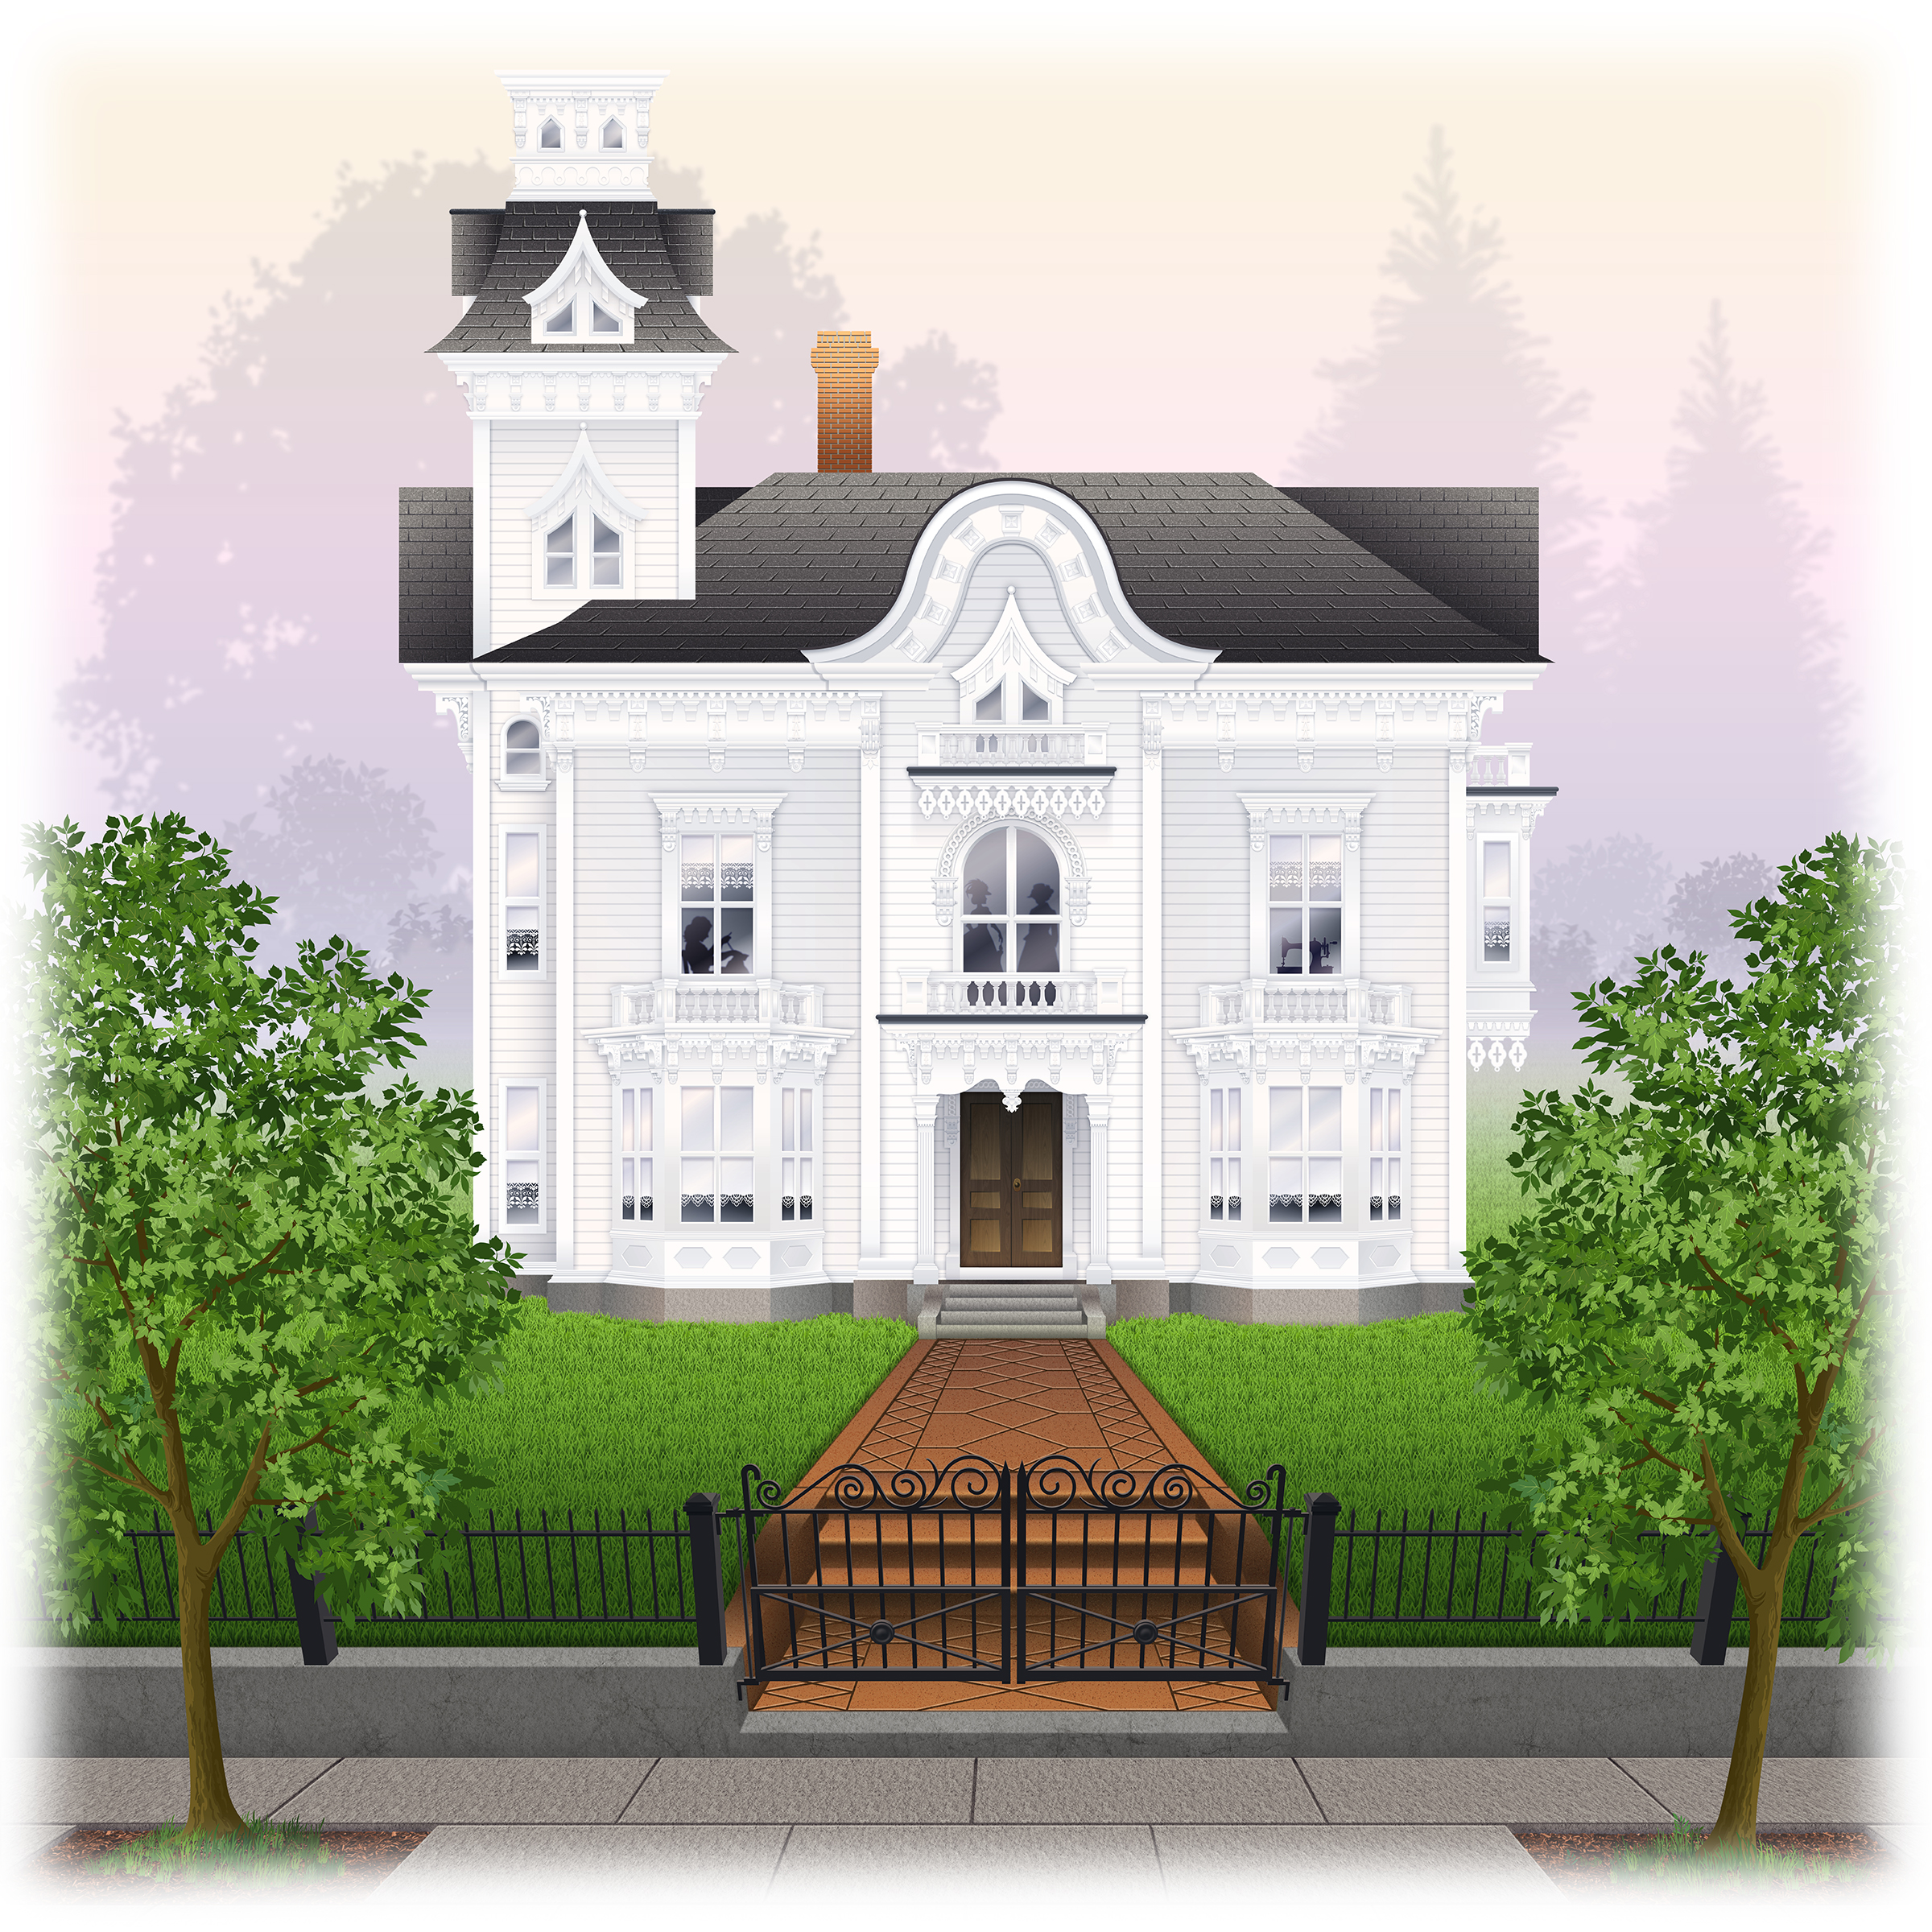 Architectural Rendering of The Wedding Cake House